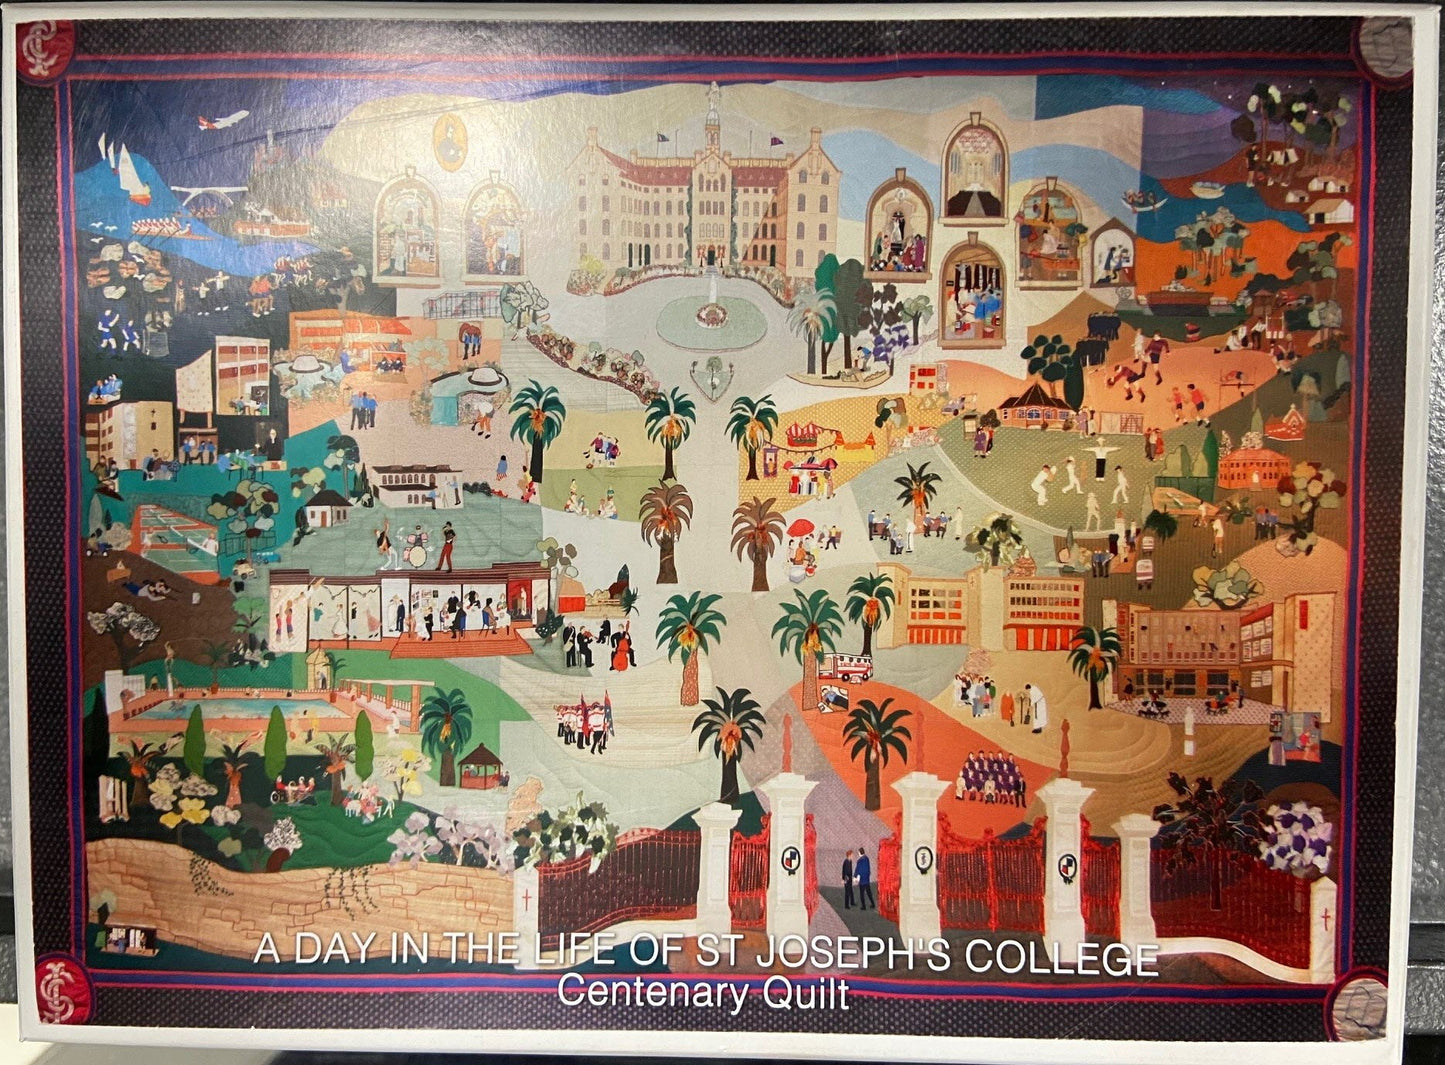 "A Day in the Life of St Joseph's College" Jigsaw Puzzle